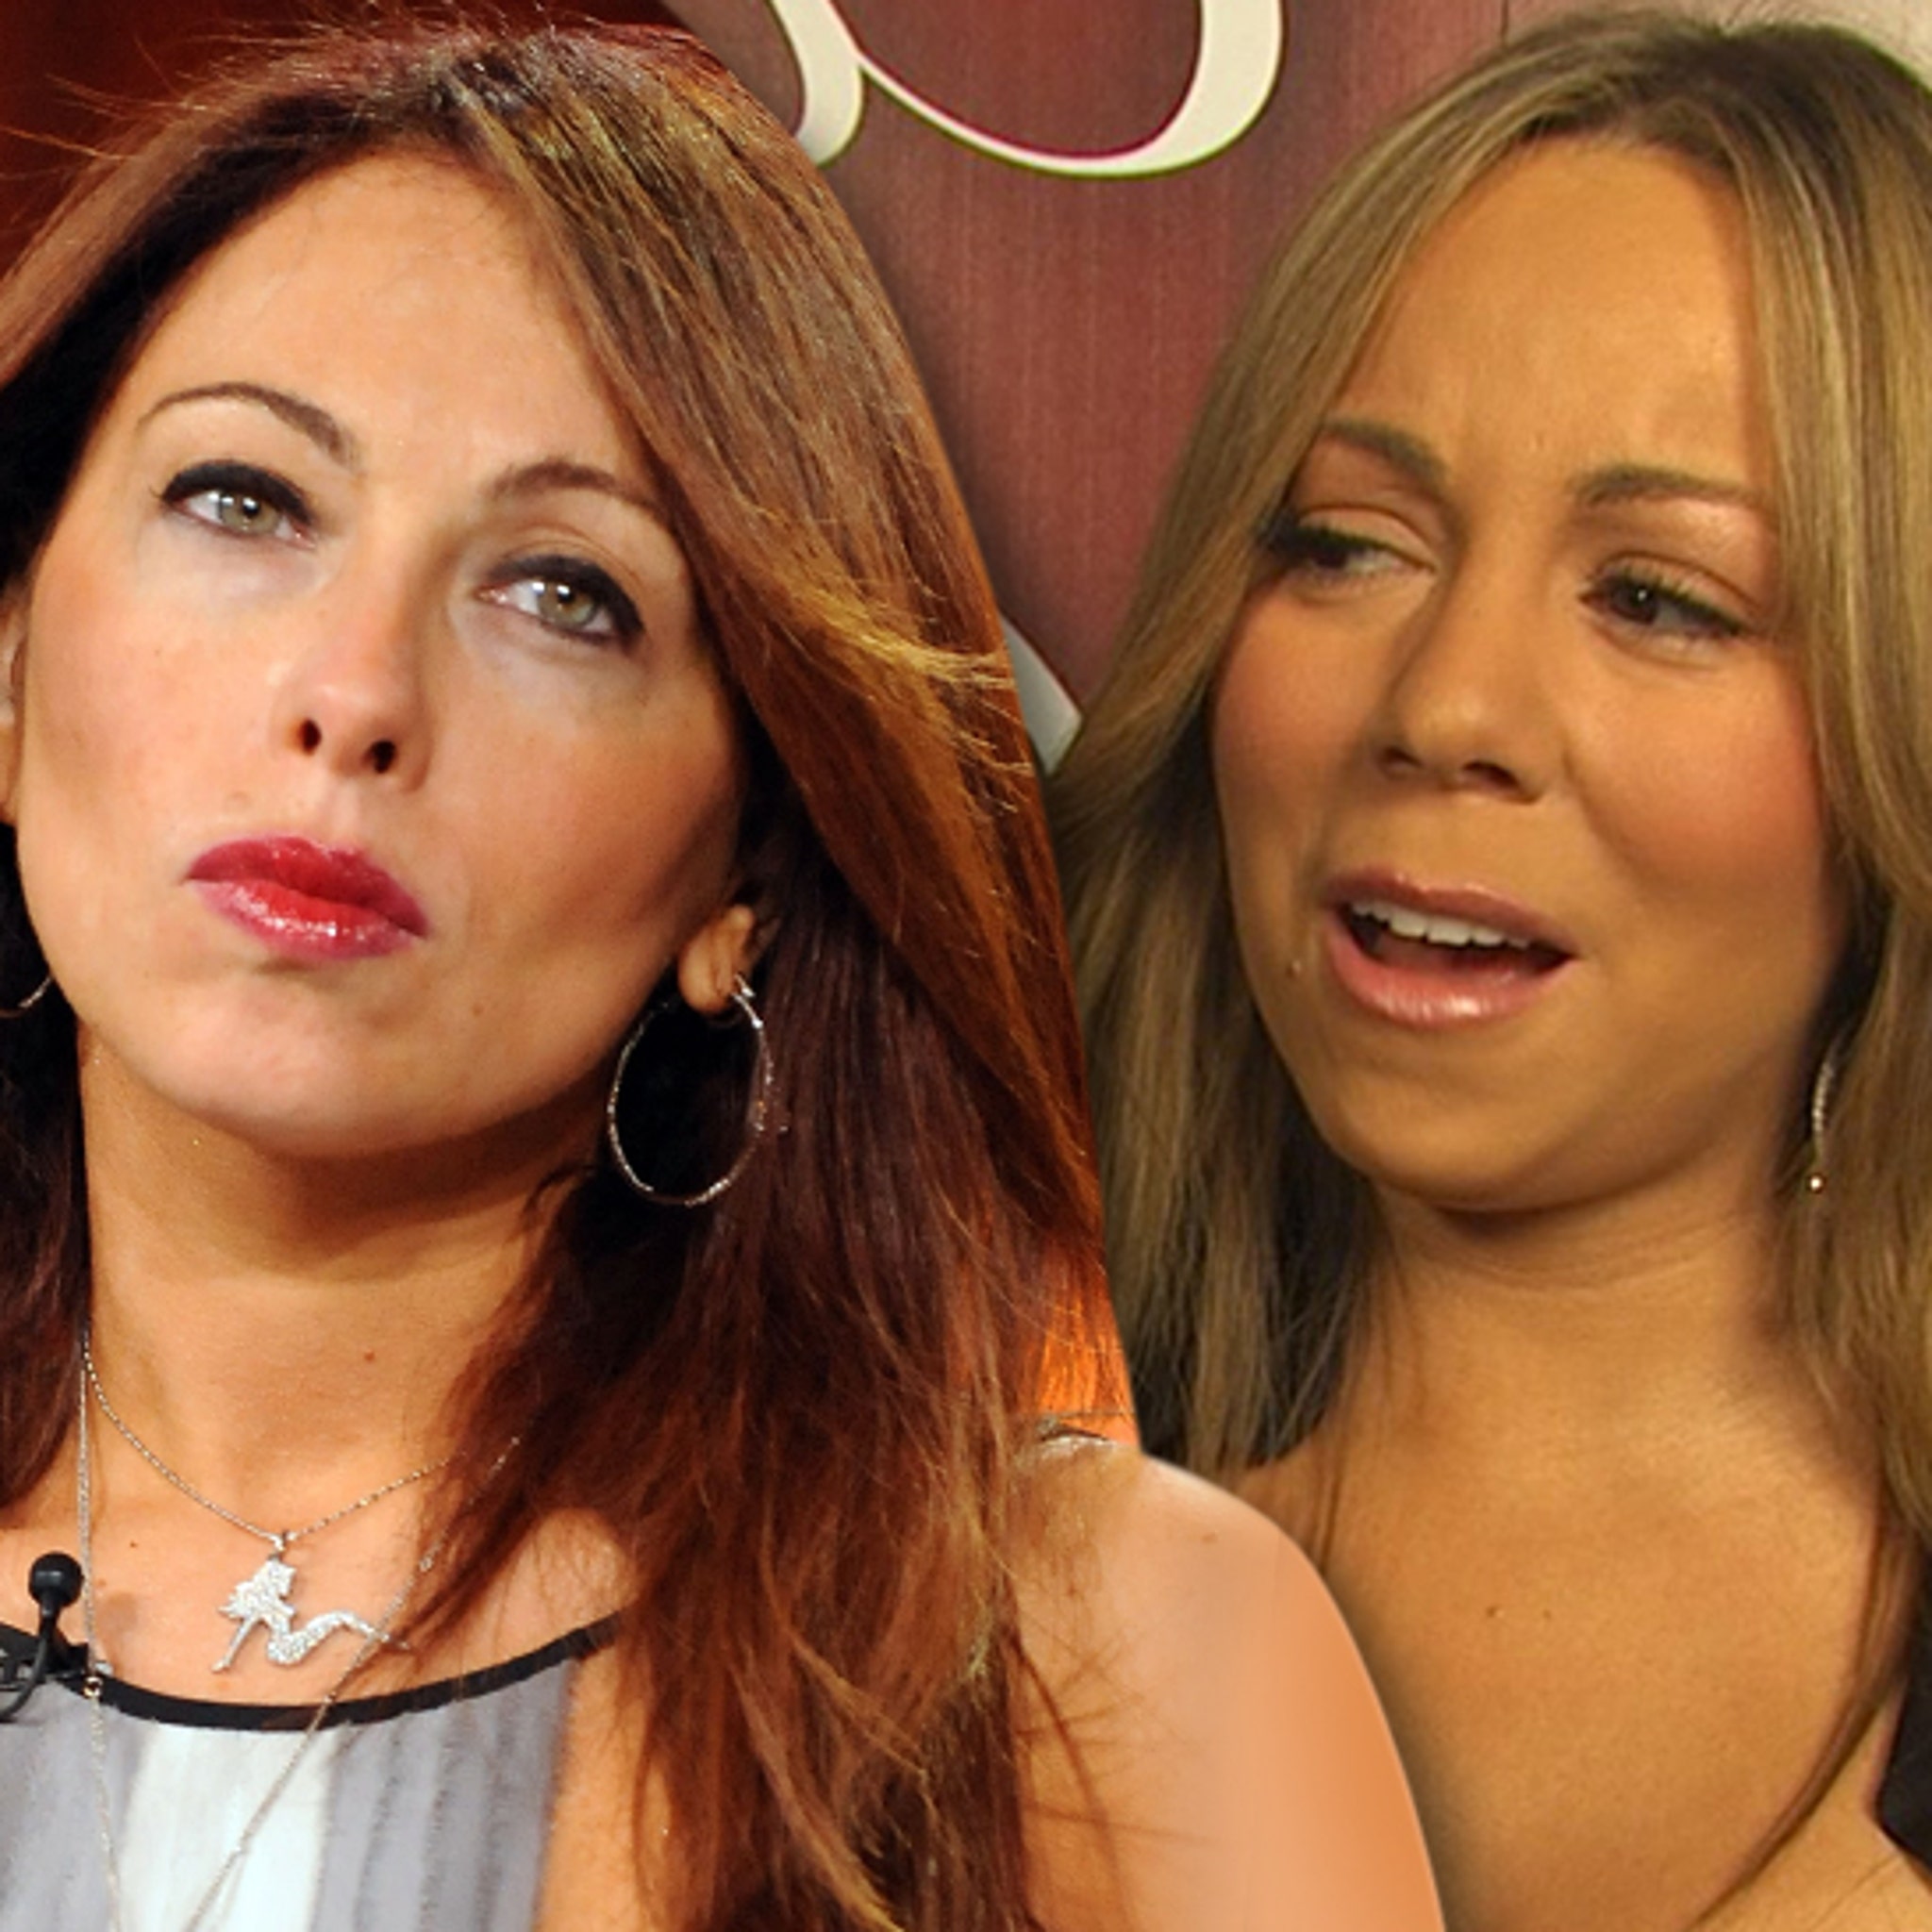 Mariah Careys Former Manager is Claiming Sexual Harassment